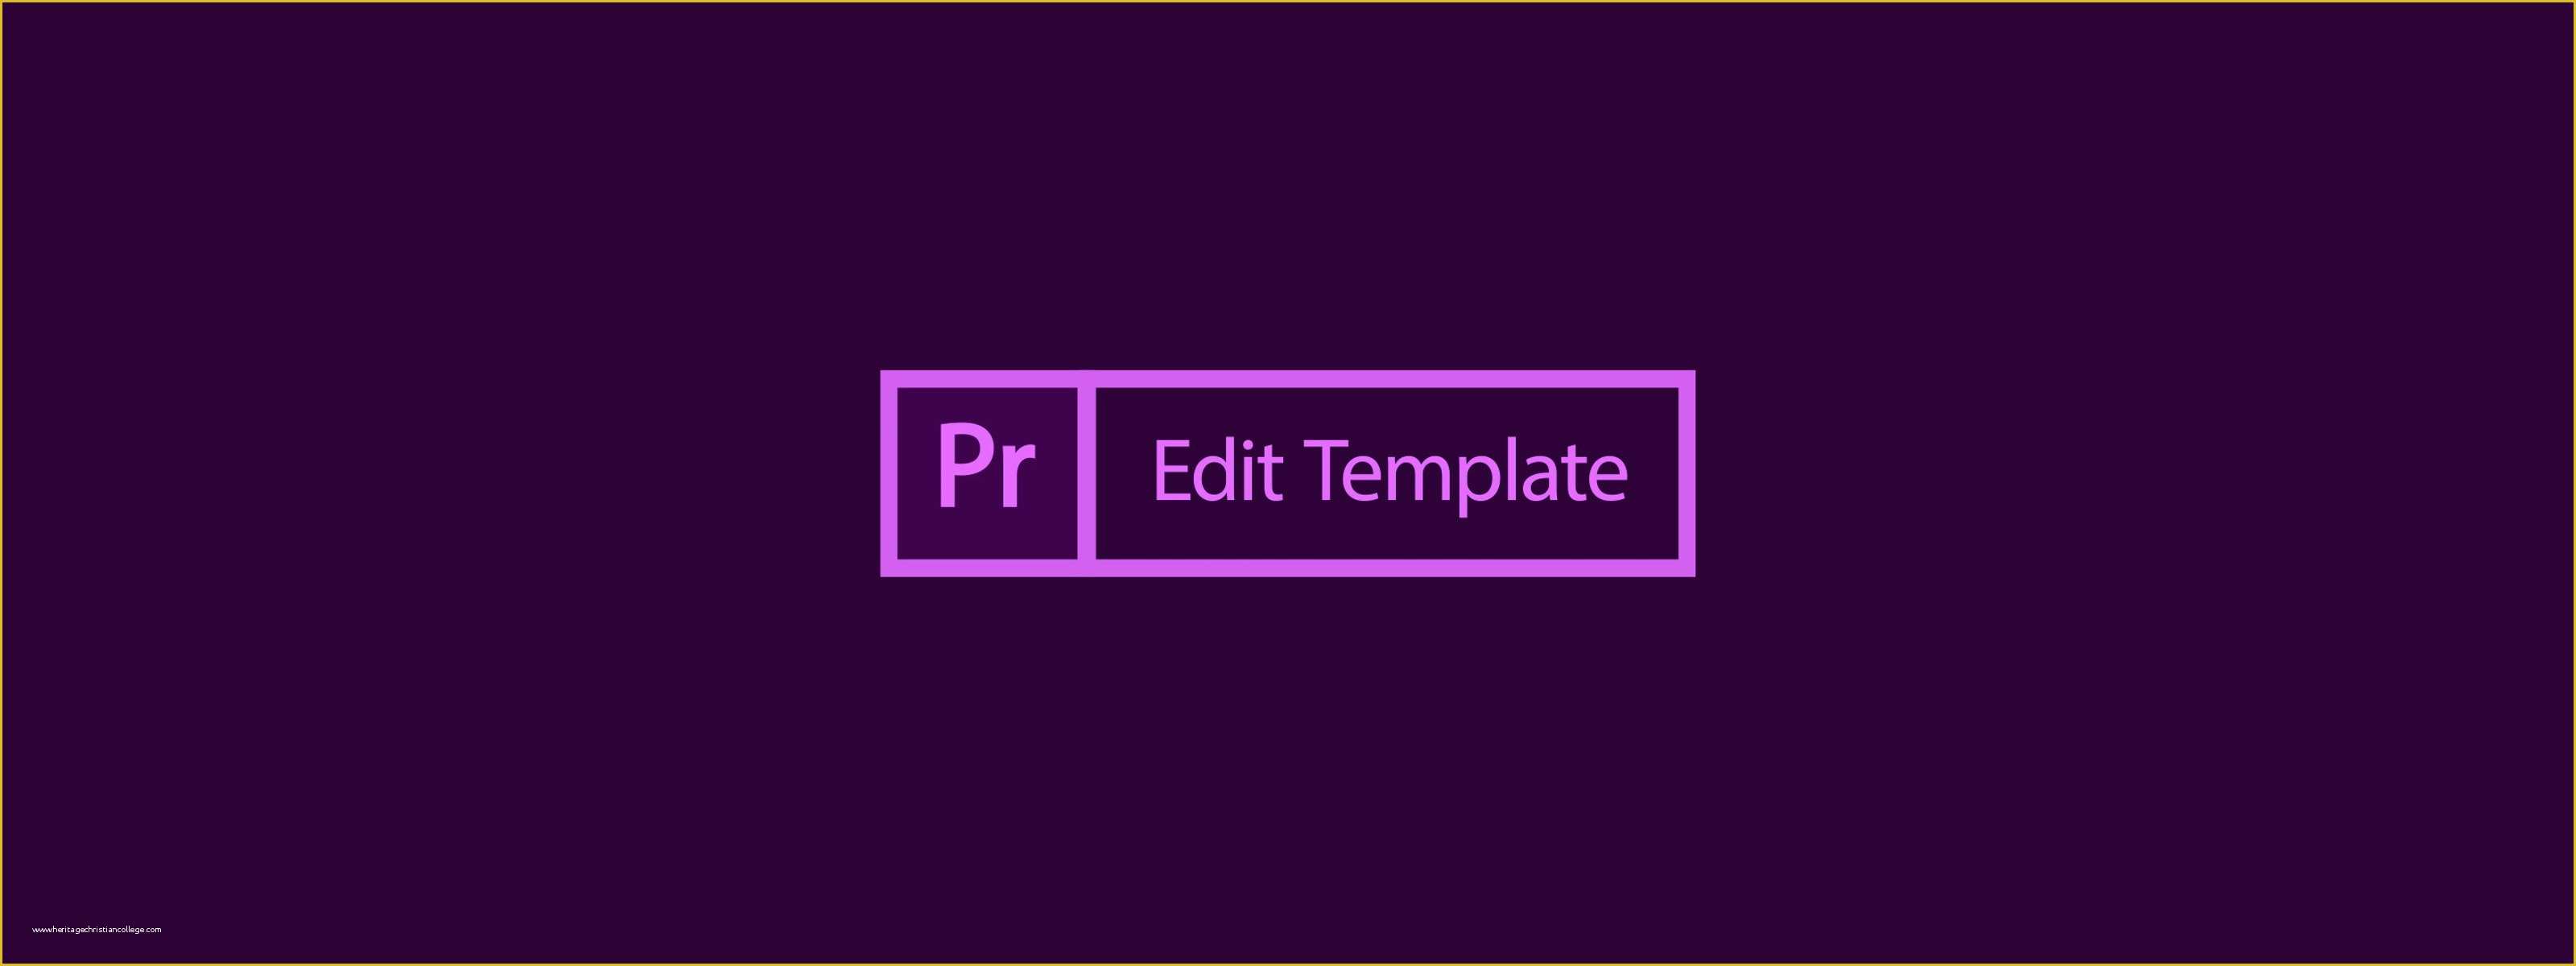 Video Editing Templates Free Download Of Free Premiere Pro Edit Template